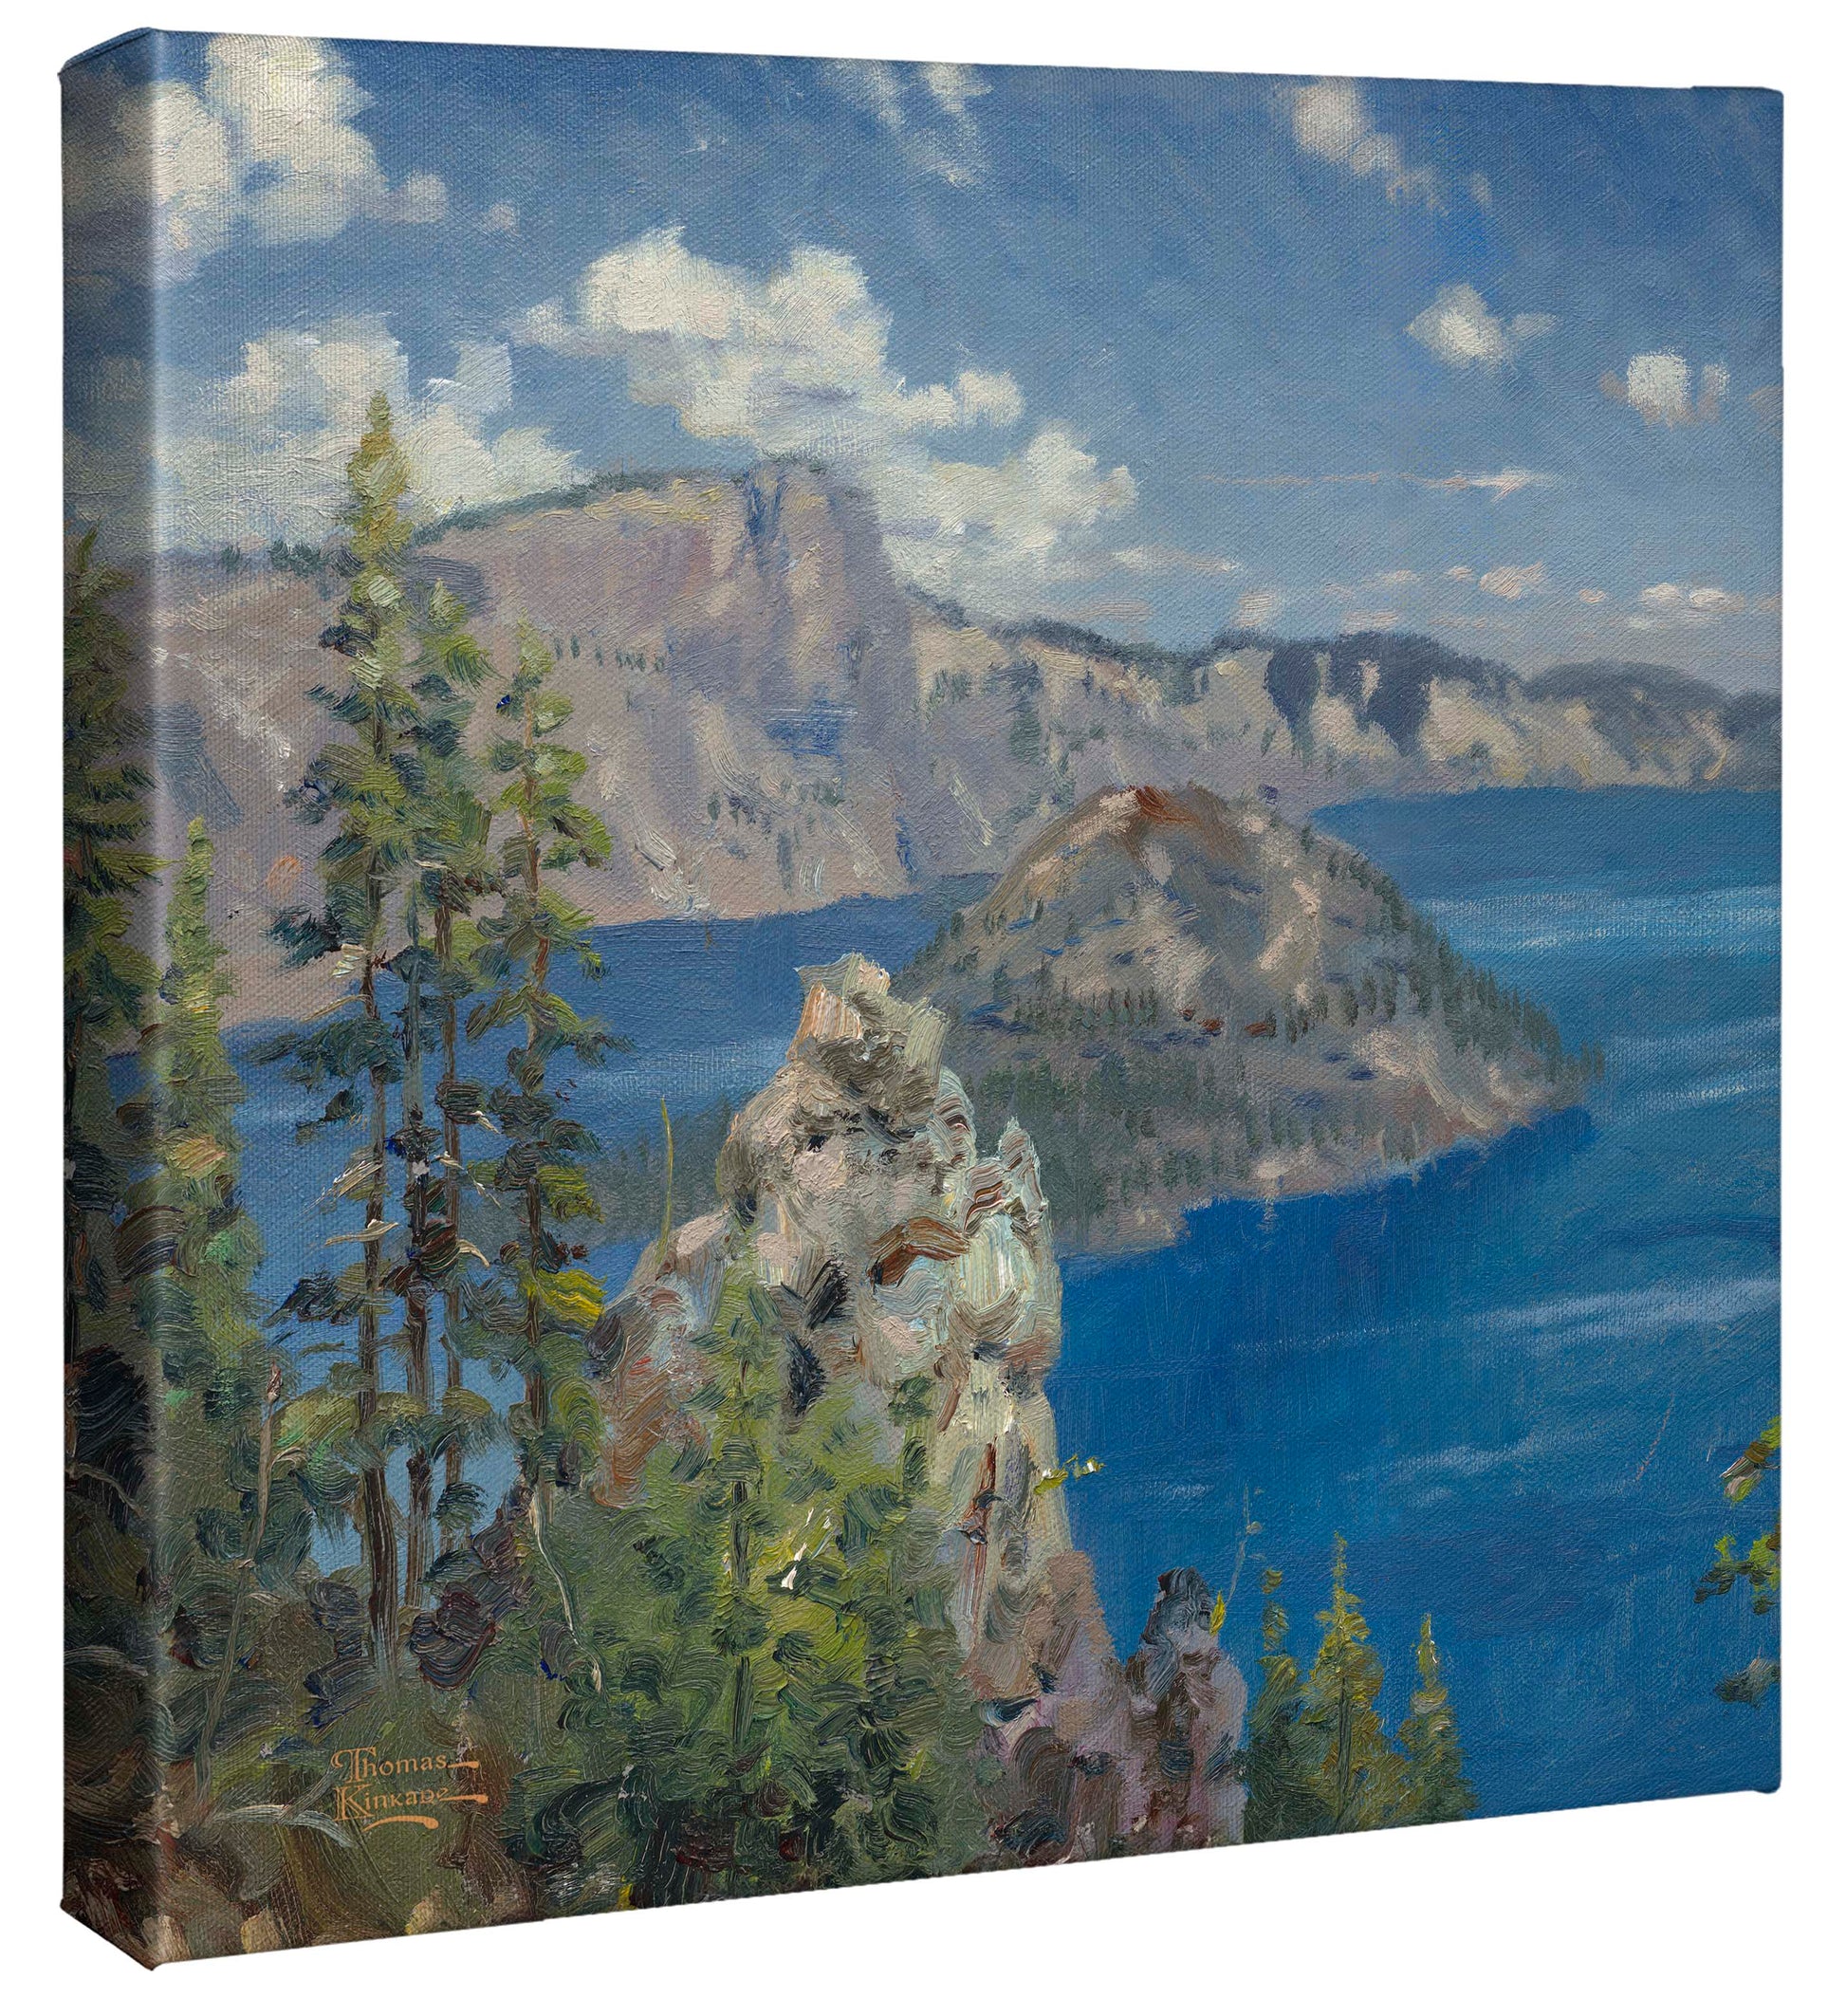 161768_CGW Crater Lake 14X14 Gallery Wrap Canvas_Mocked.jpg